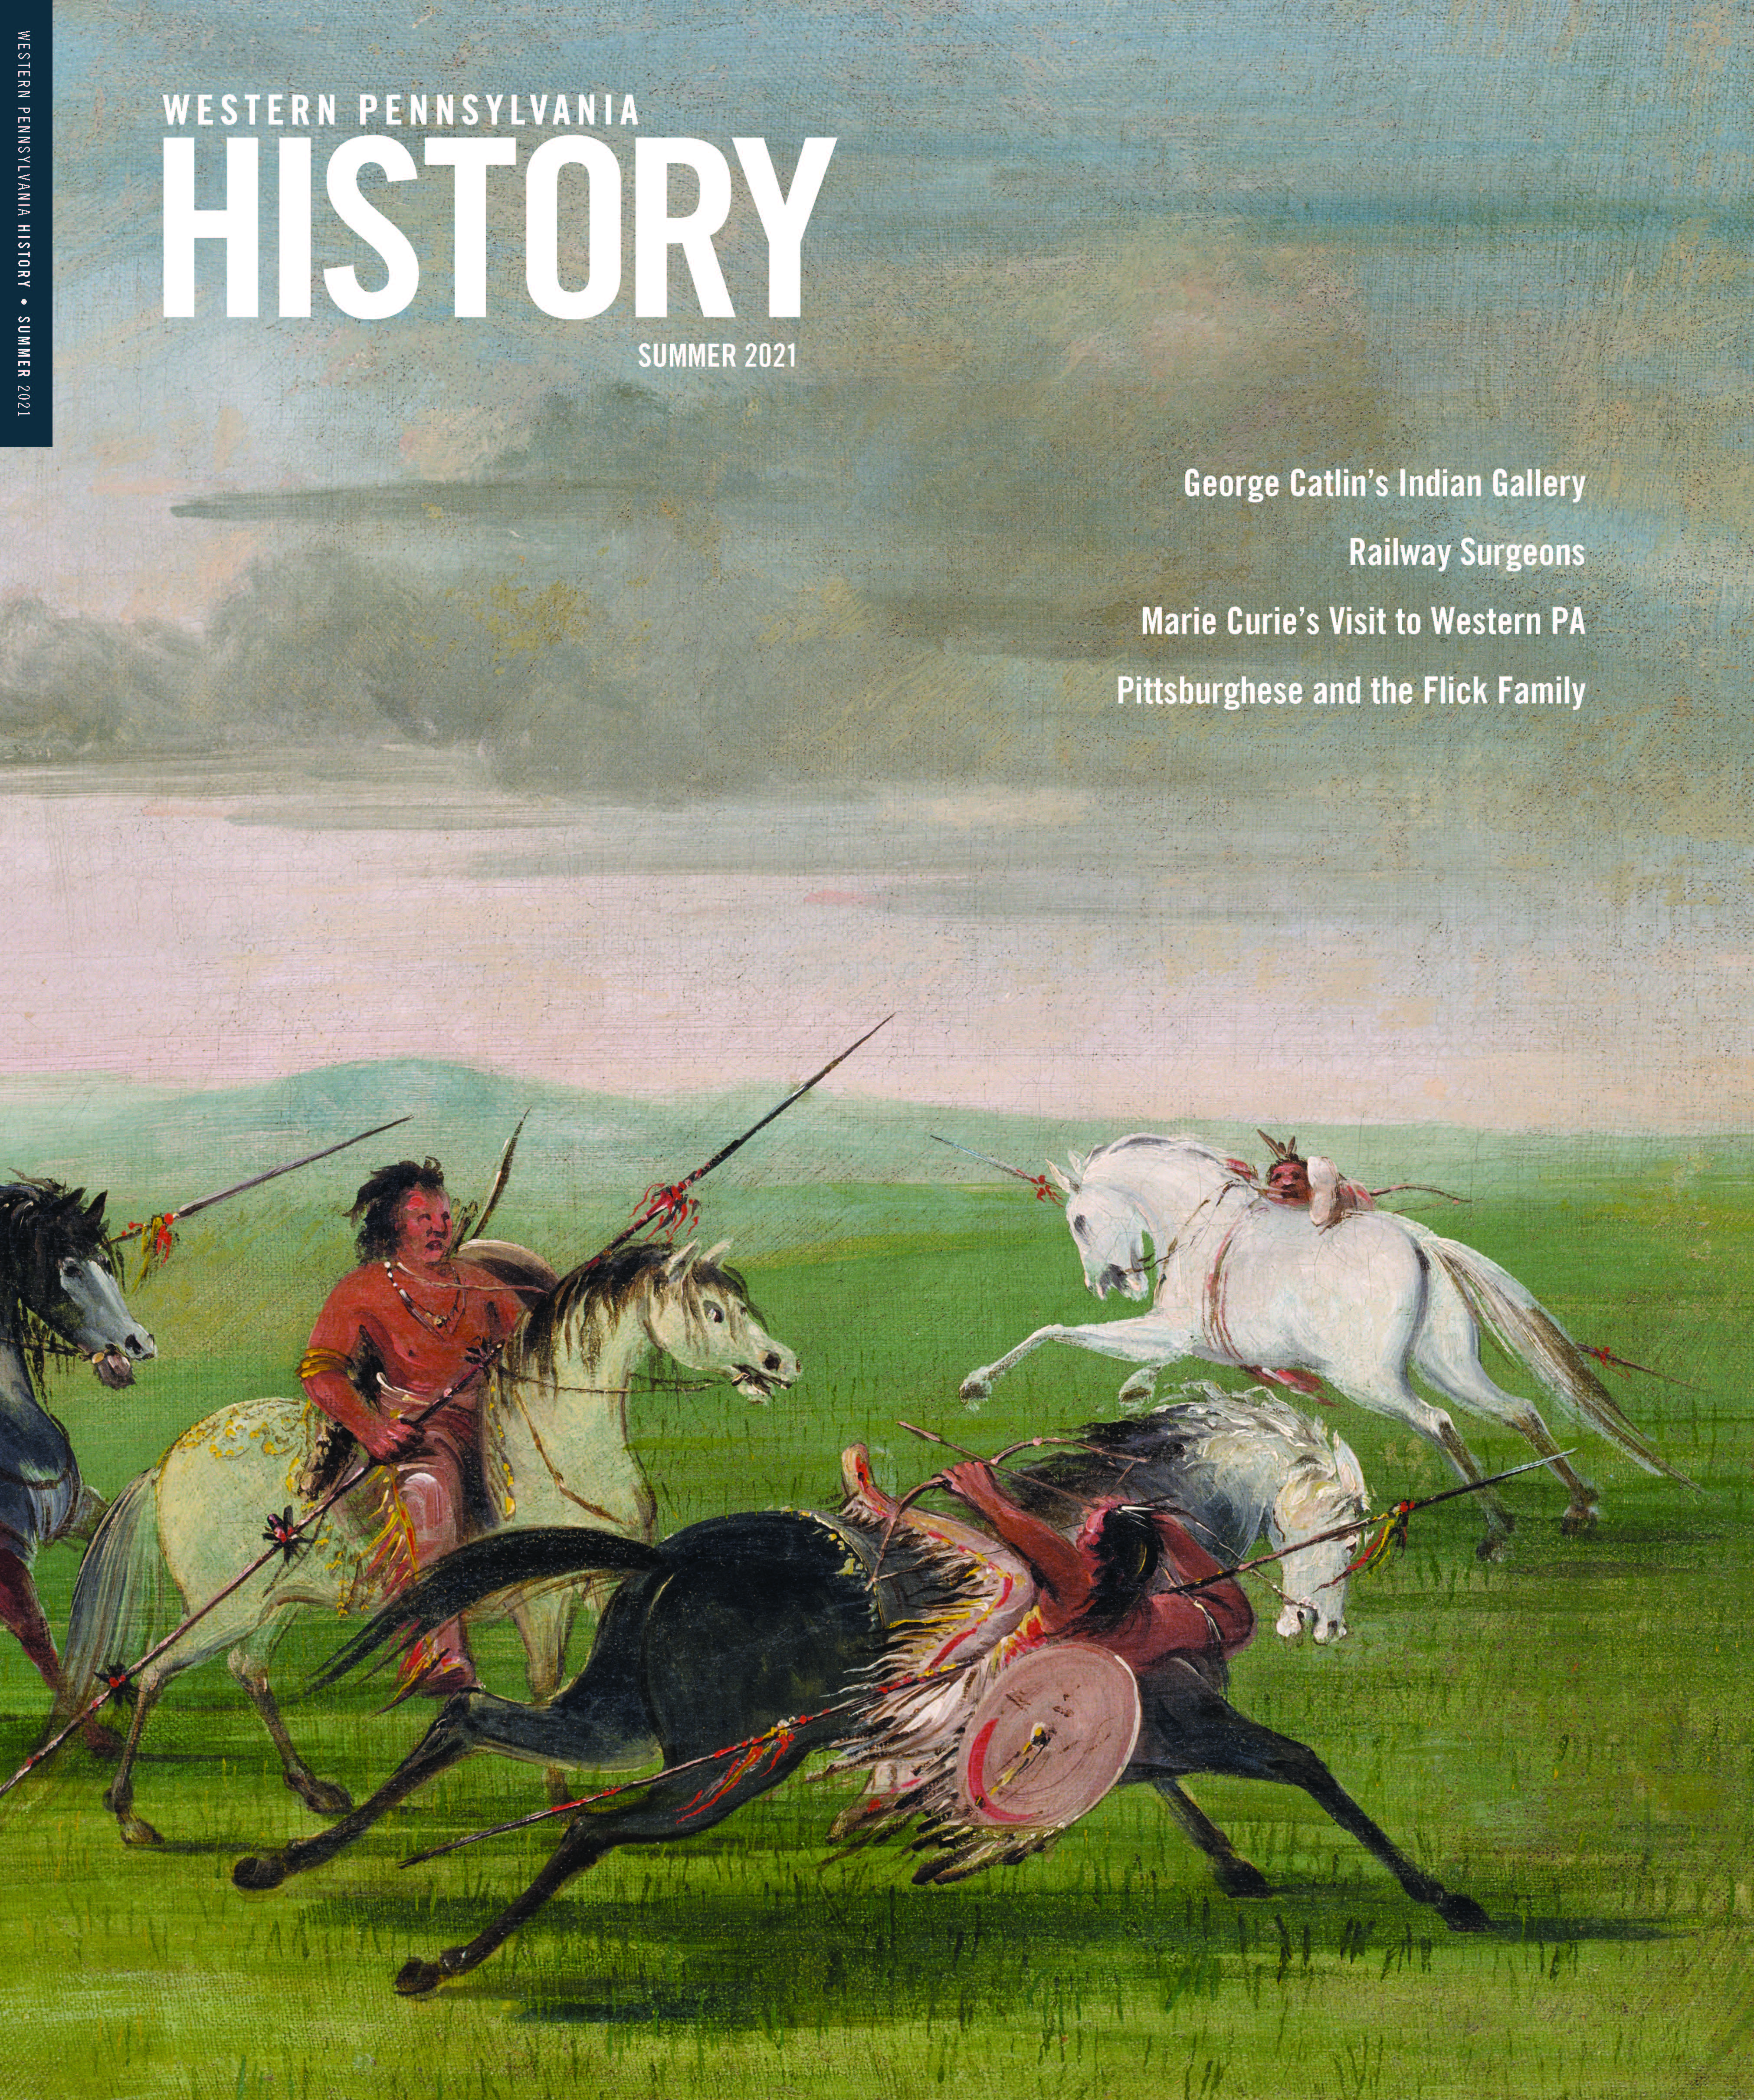 Magazine cover with painting of American Indians riding horses and wielding spears.